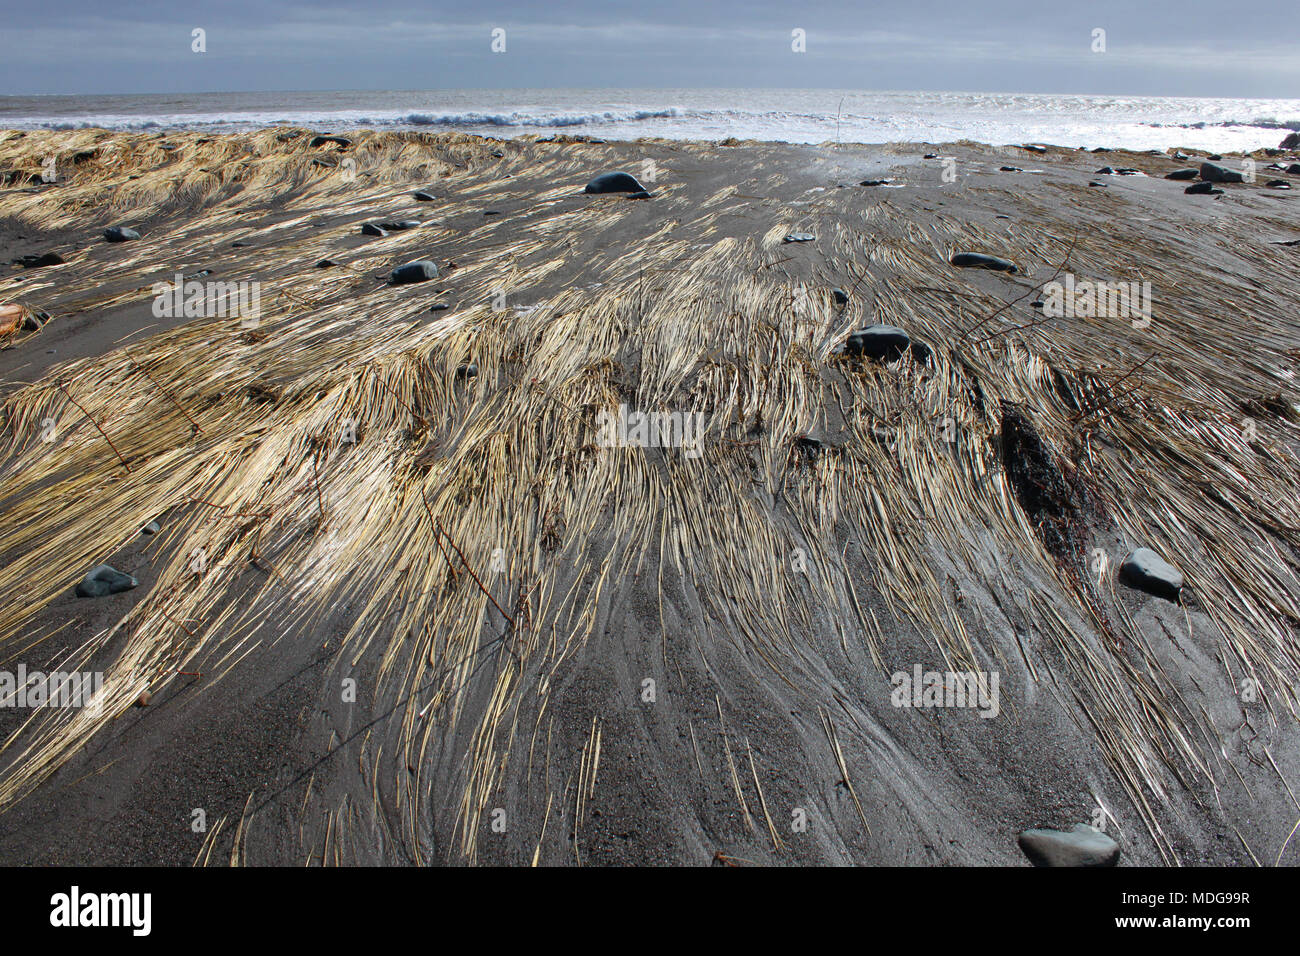 Sand washed over the barrier at Long Beach, Lower East Chezzetcook, Nova Scotia, Canada. Stock Photo